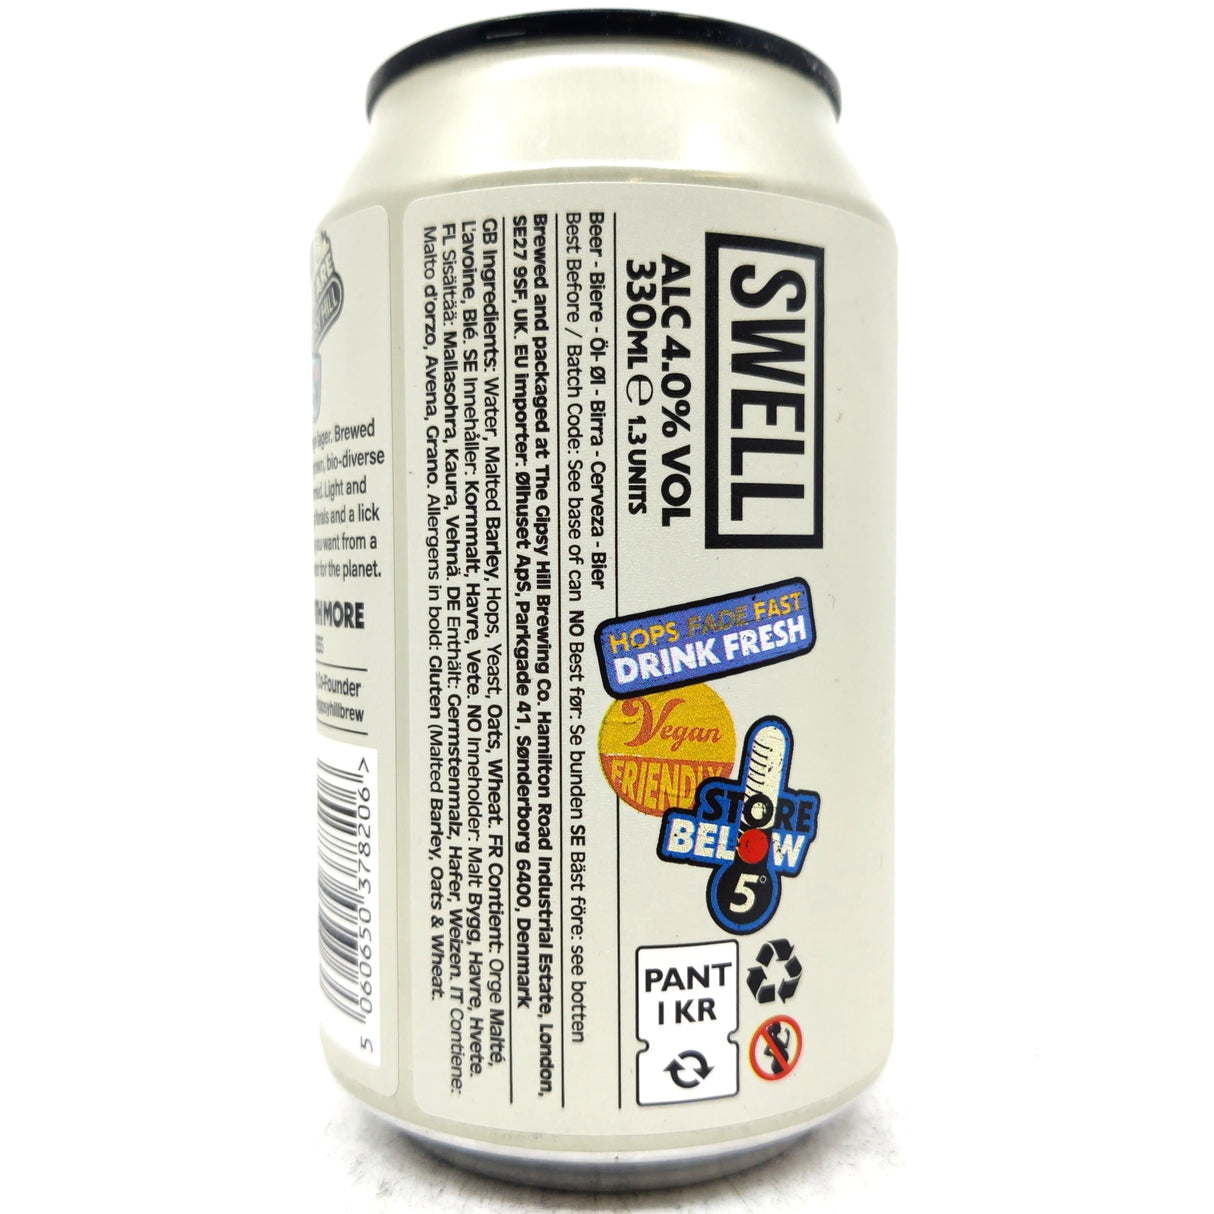 Gipsy Hill Swell Lager 4% (330ml can)-Hop Burns & Black